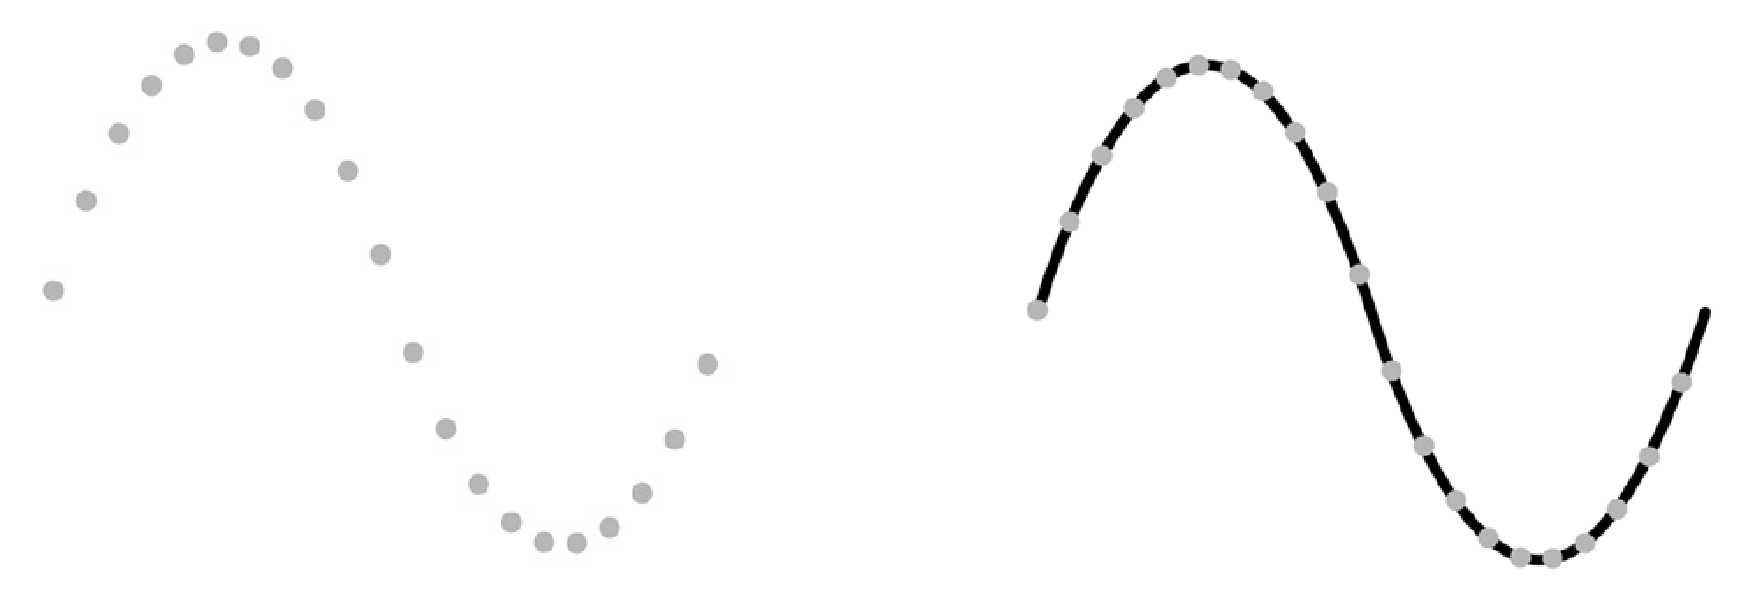 (Left) A series of sampled points representing a sine wave; (Right) the reconstructed sine wave.